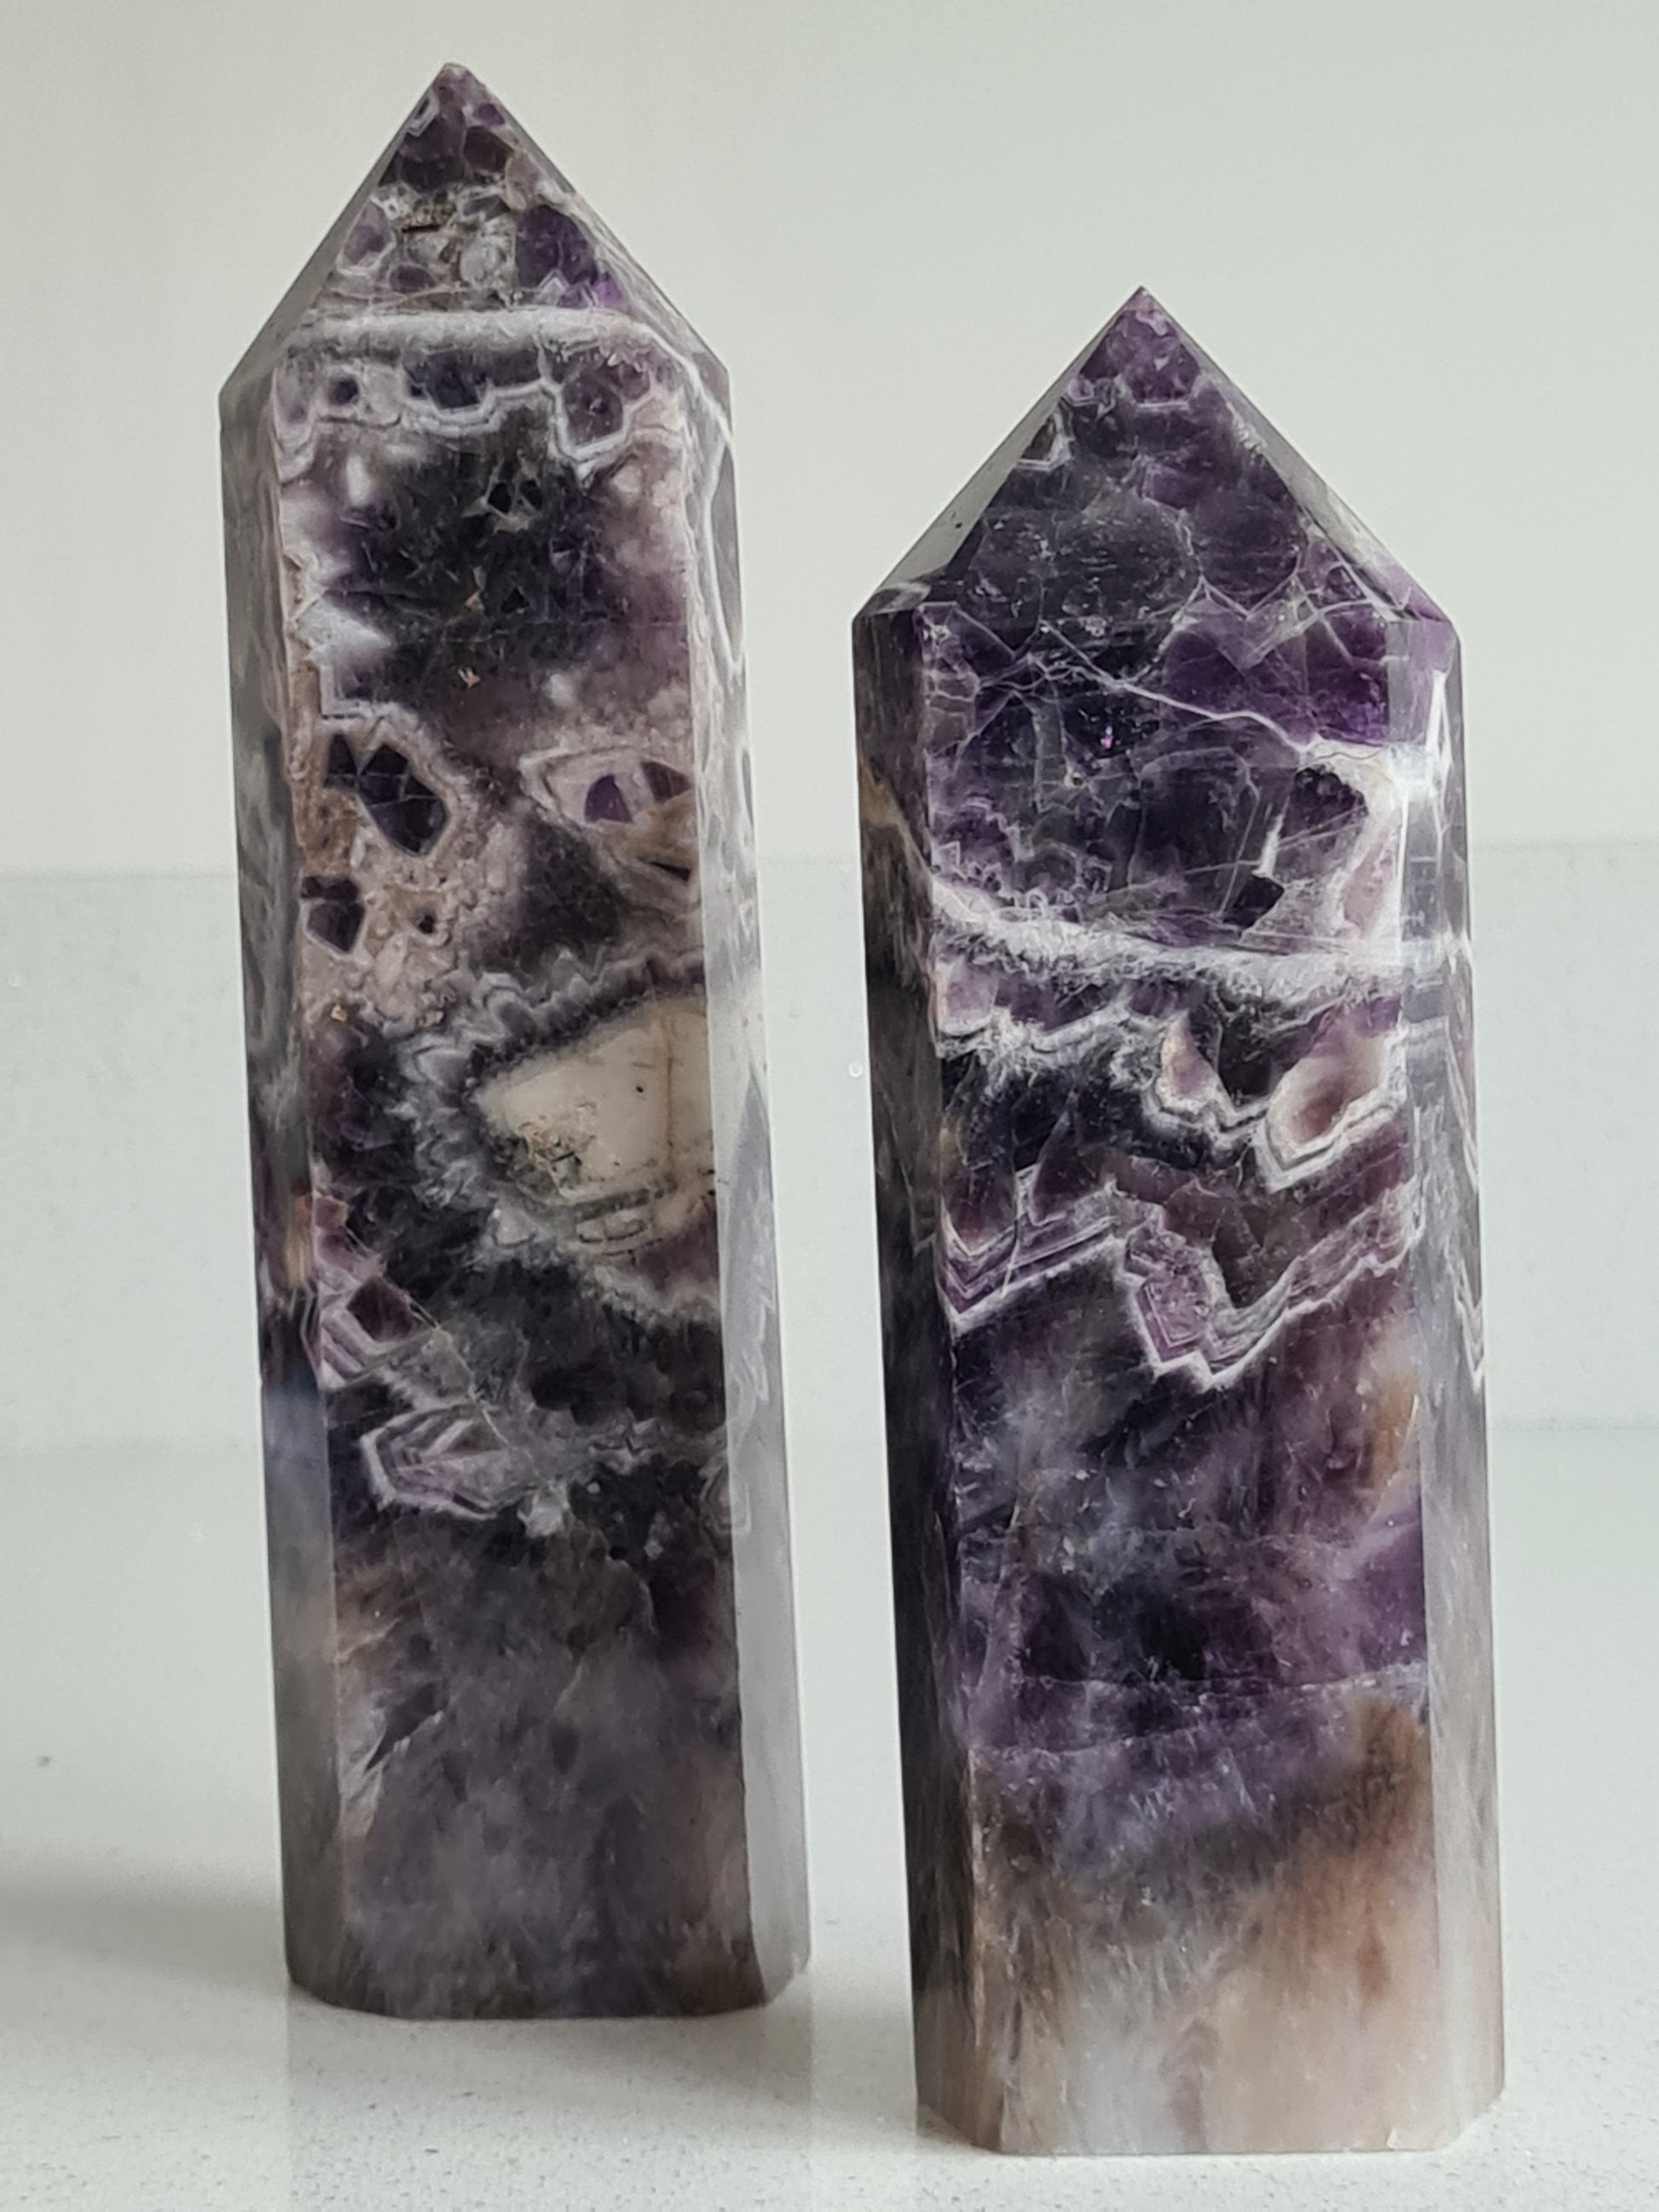 Two Large Dream Amethyst Towers, measuring one at 56cm, one at 55cm tall. Unique deep purple and white chevron banding with some smoky quartz sections